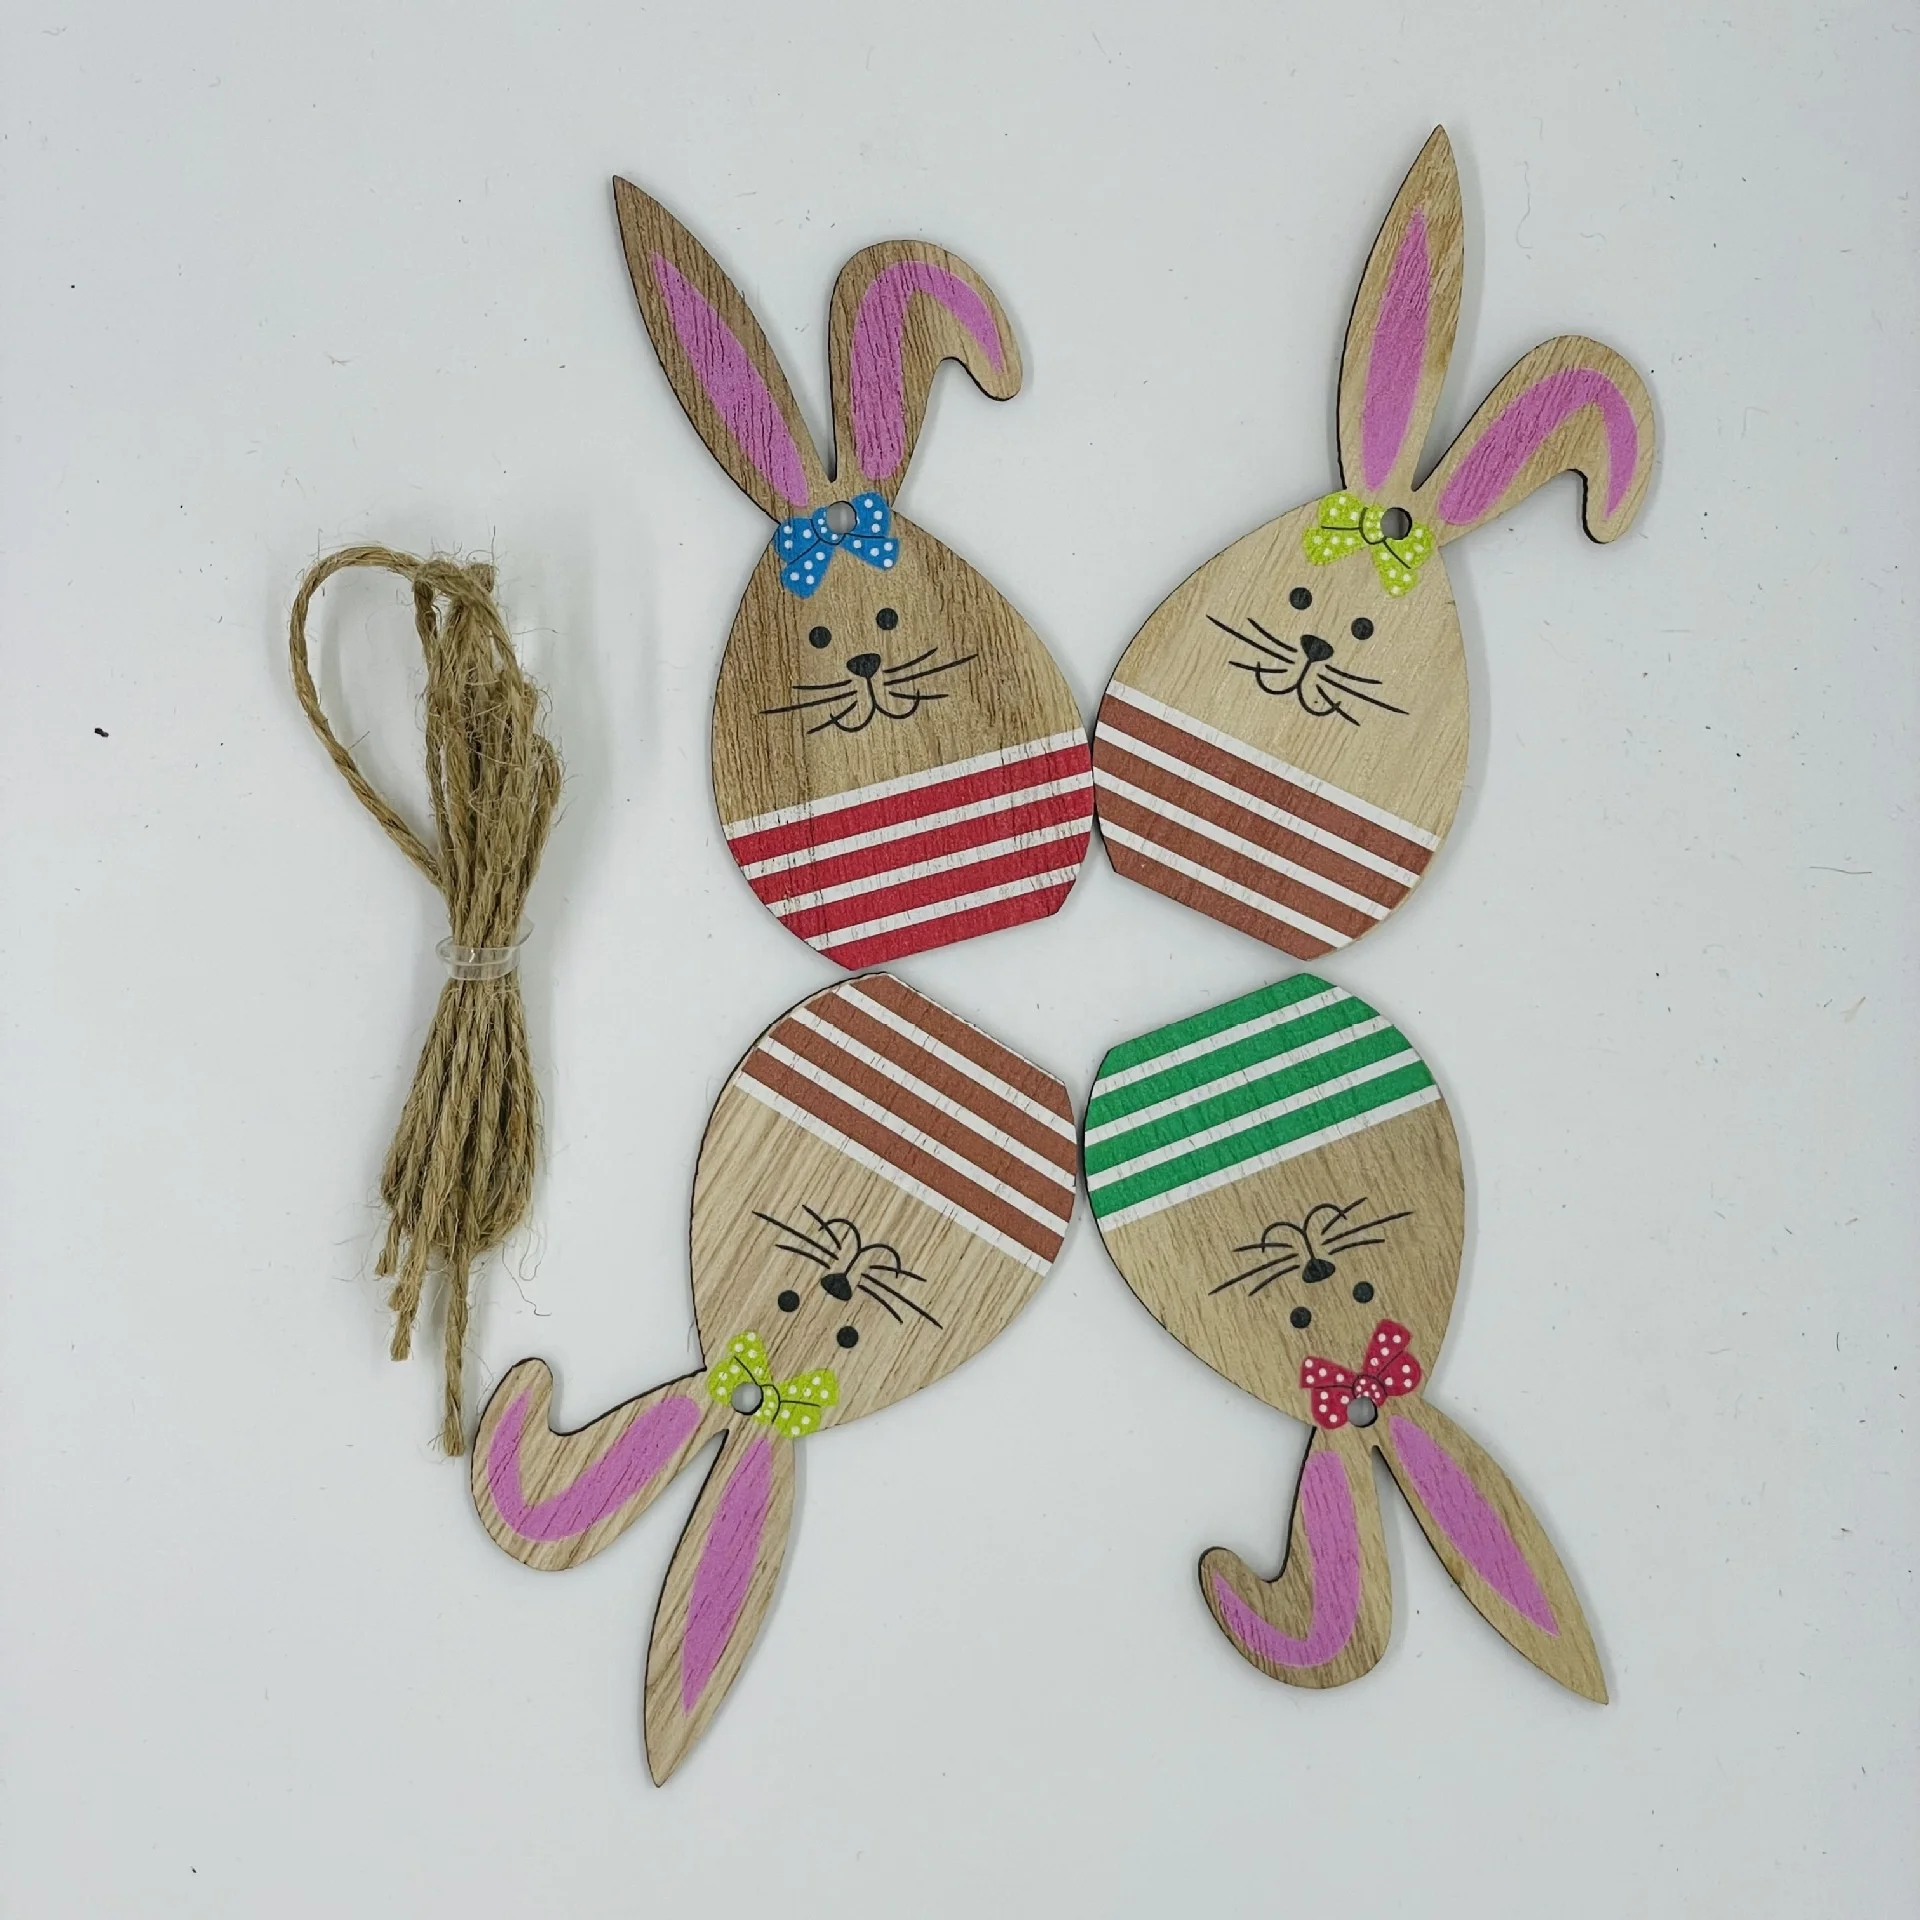 New Easter Bunny Wooden Crafts for Home Decoration Small Series of Fun DIY Knick-Knacks for Children